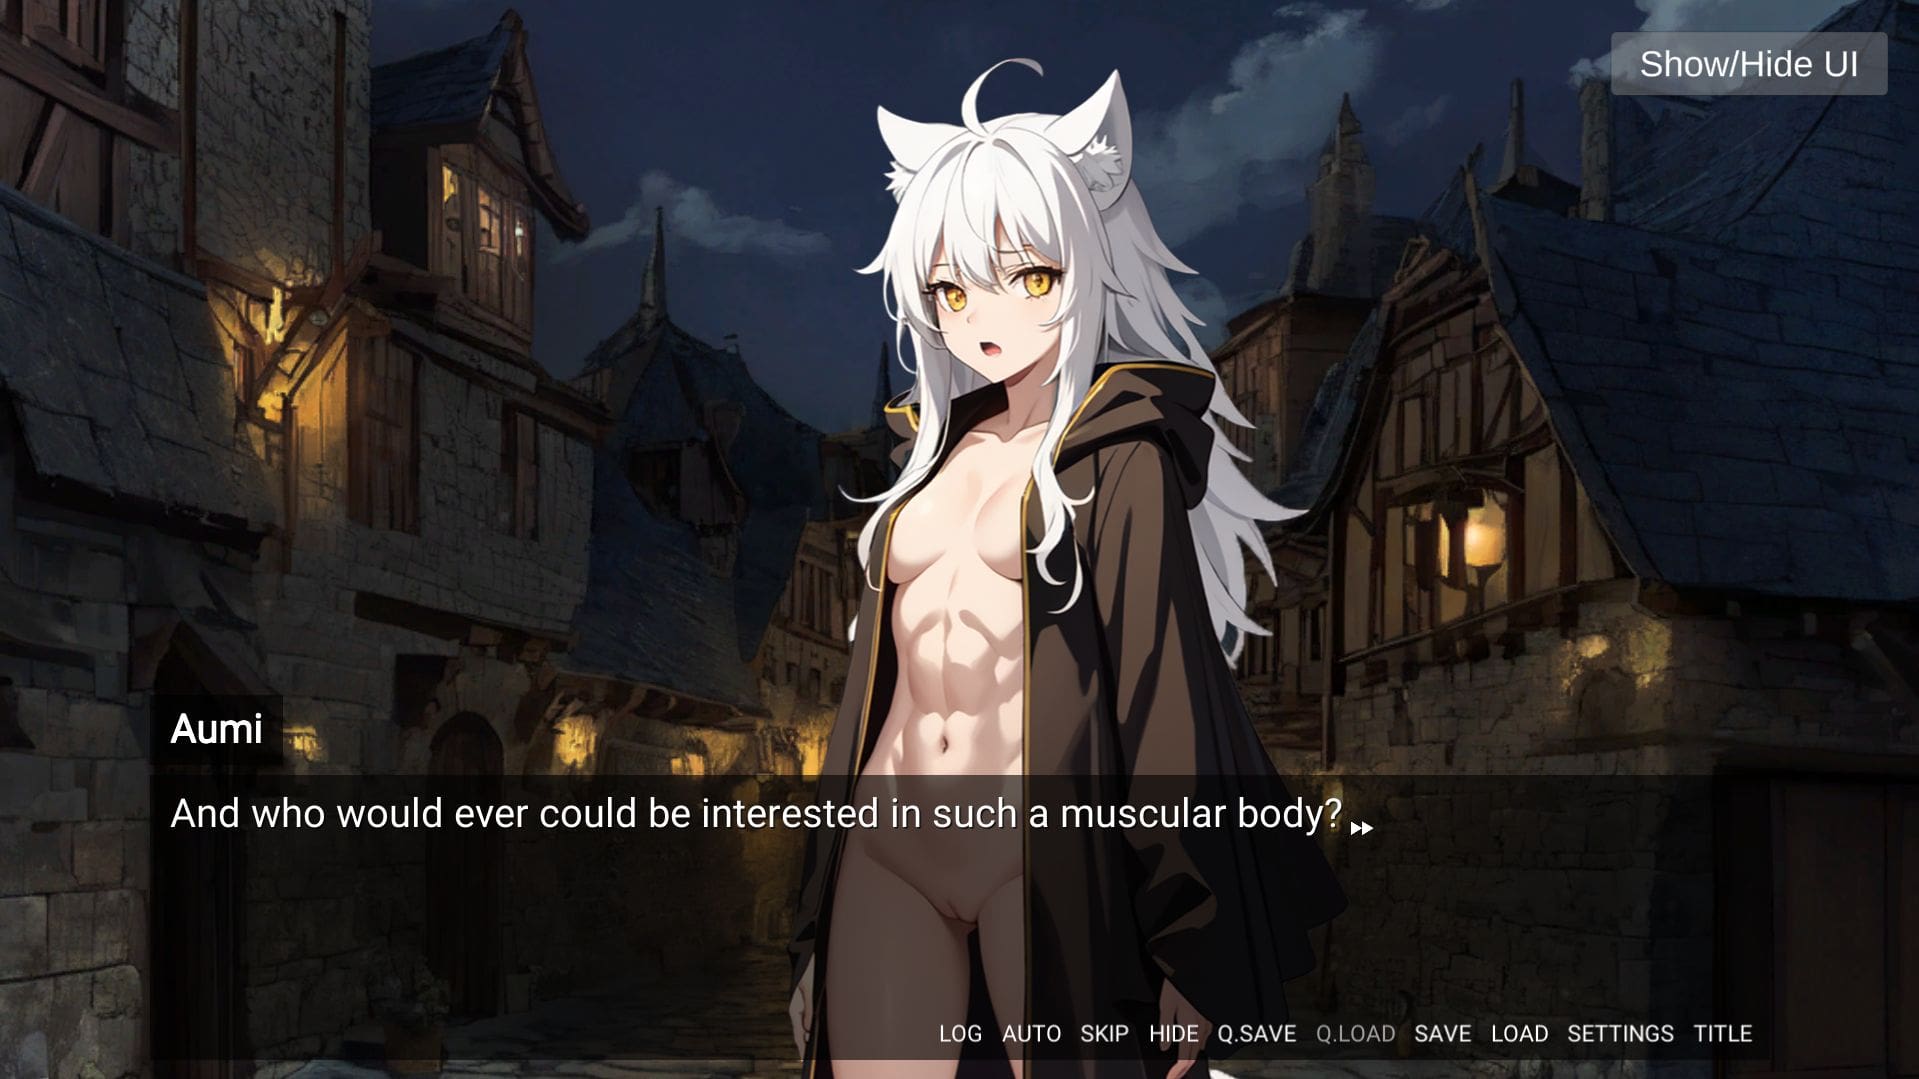 My Life in Another World Full of Horny Monster Girls